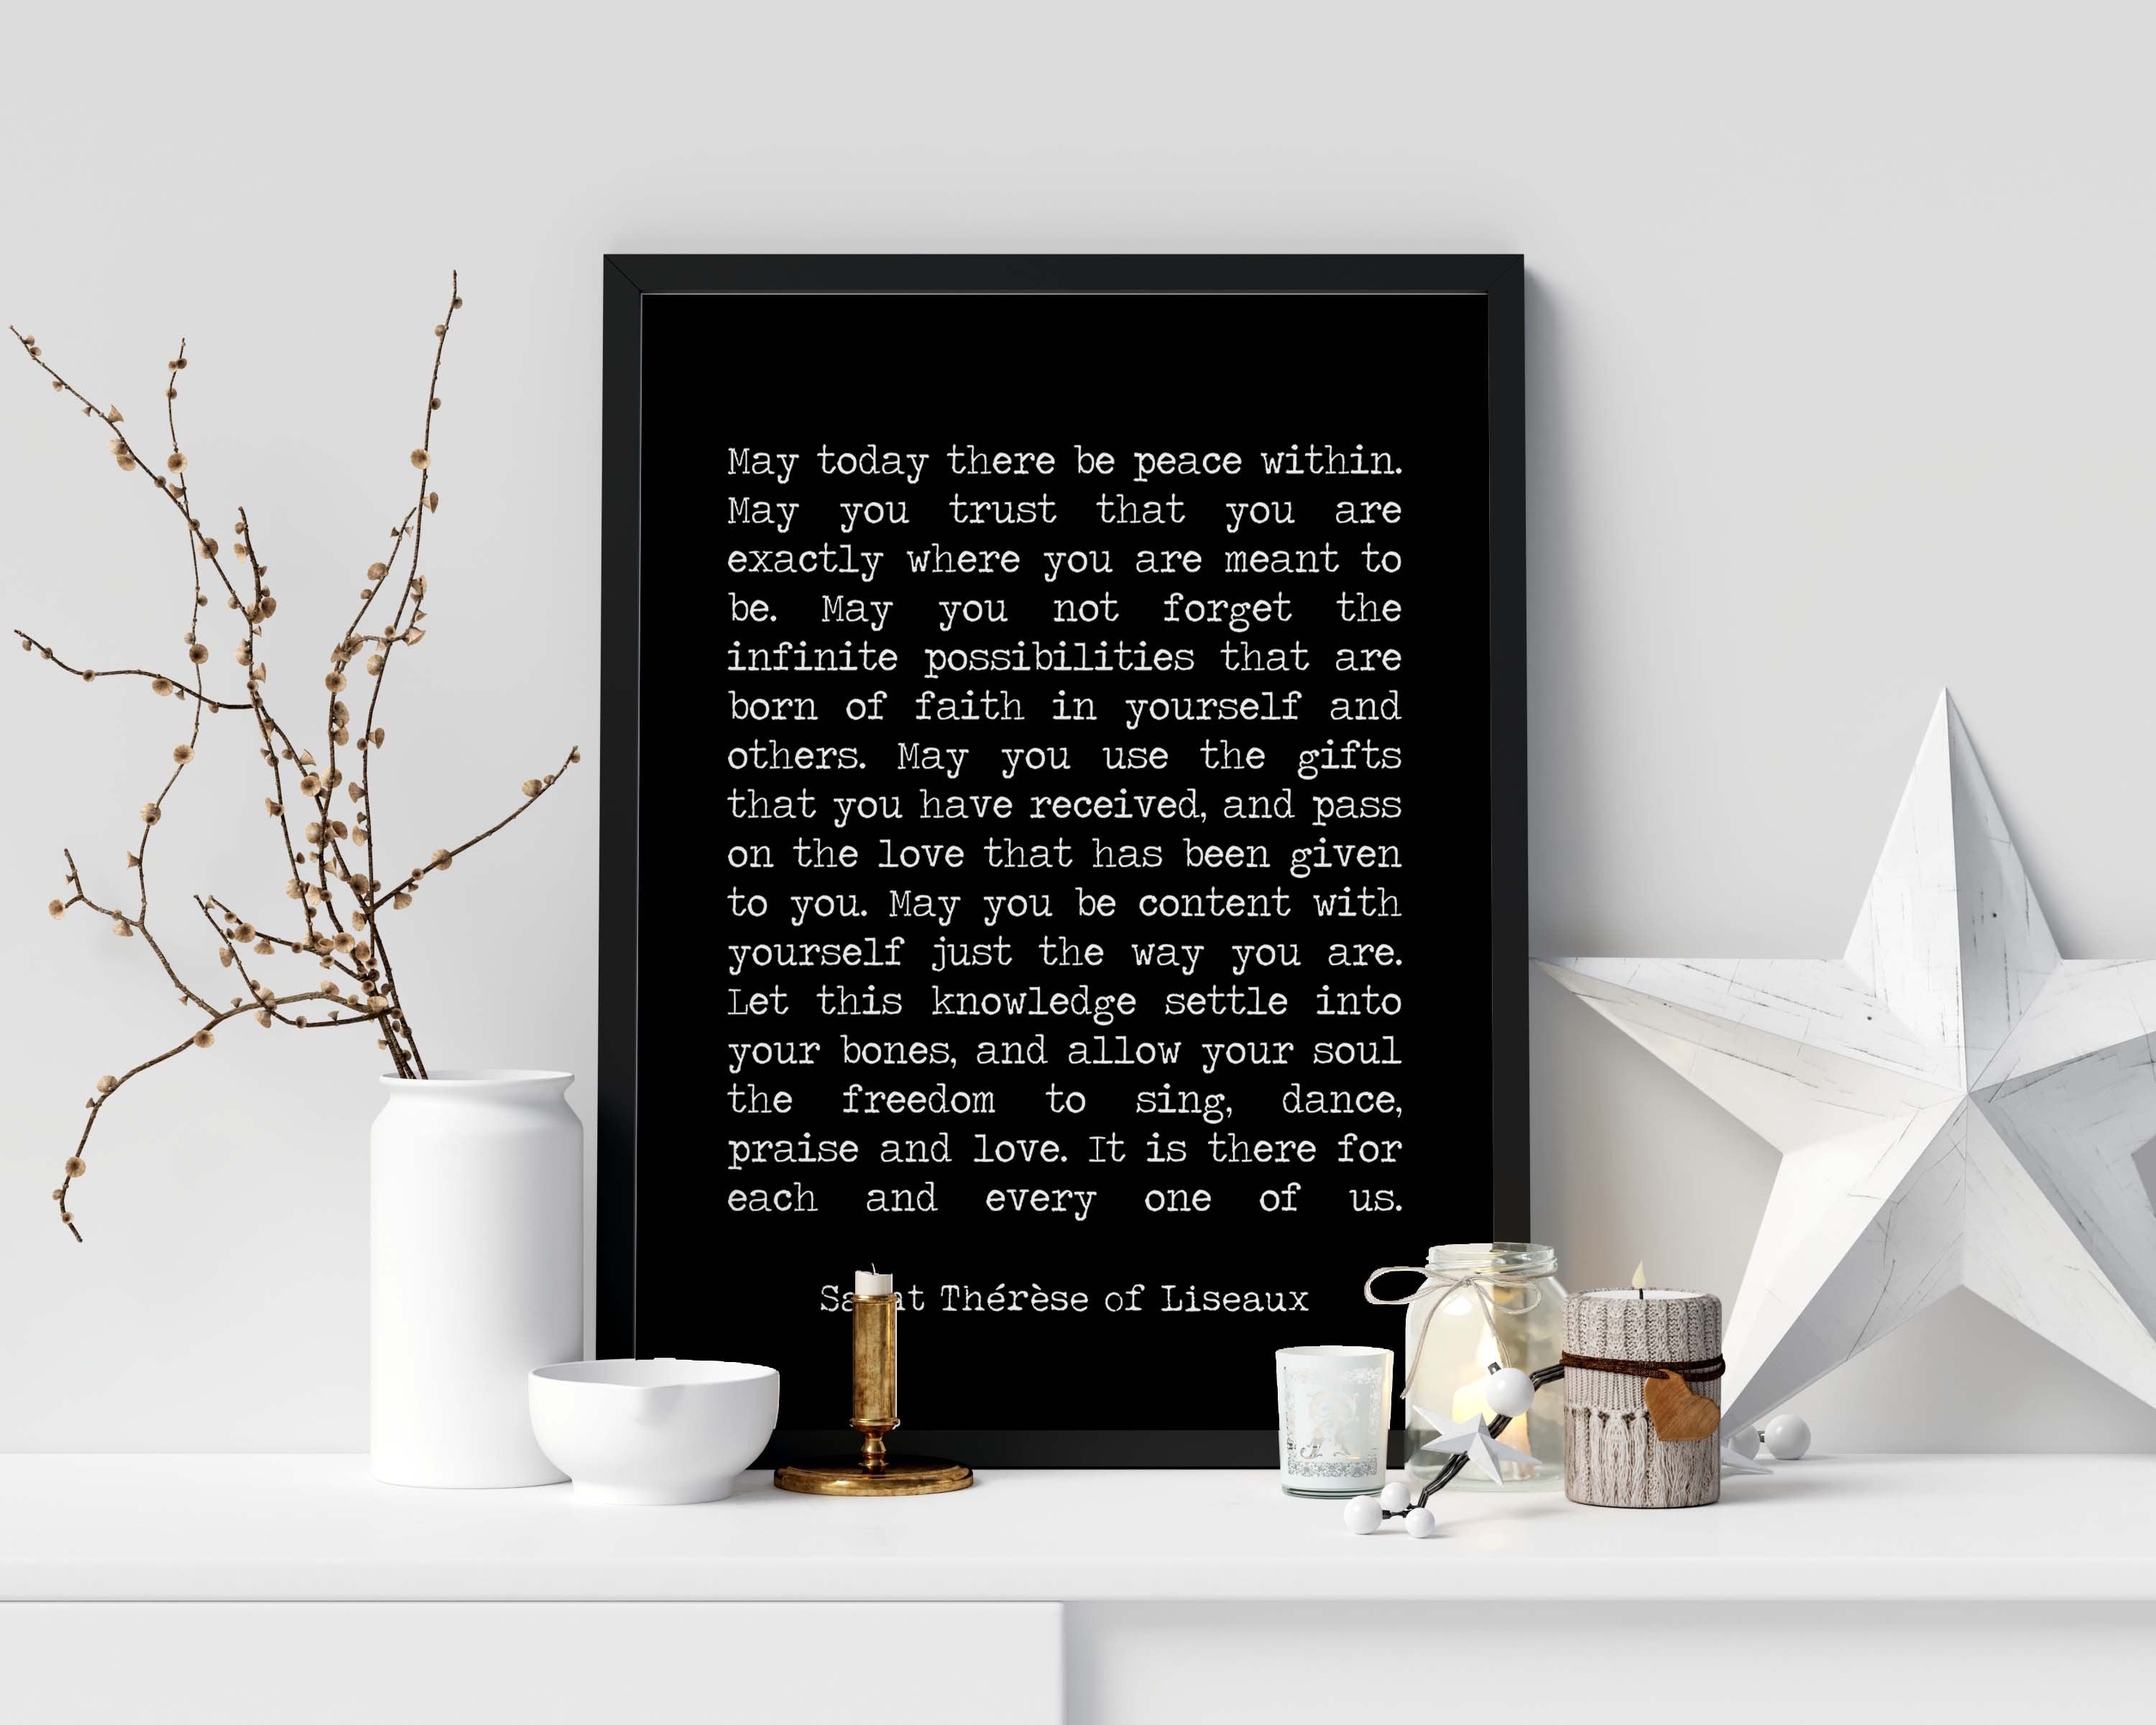 St Therese of Lisieux Peace Quote Print in Black & White, May Today There Be Peace Within Unframed Inspirational Quote Wall Art Print - BookQuoteDecor